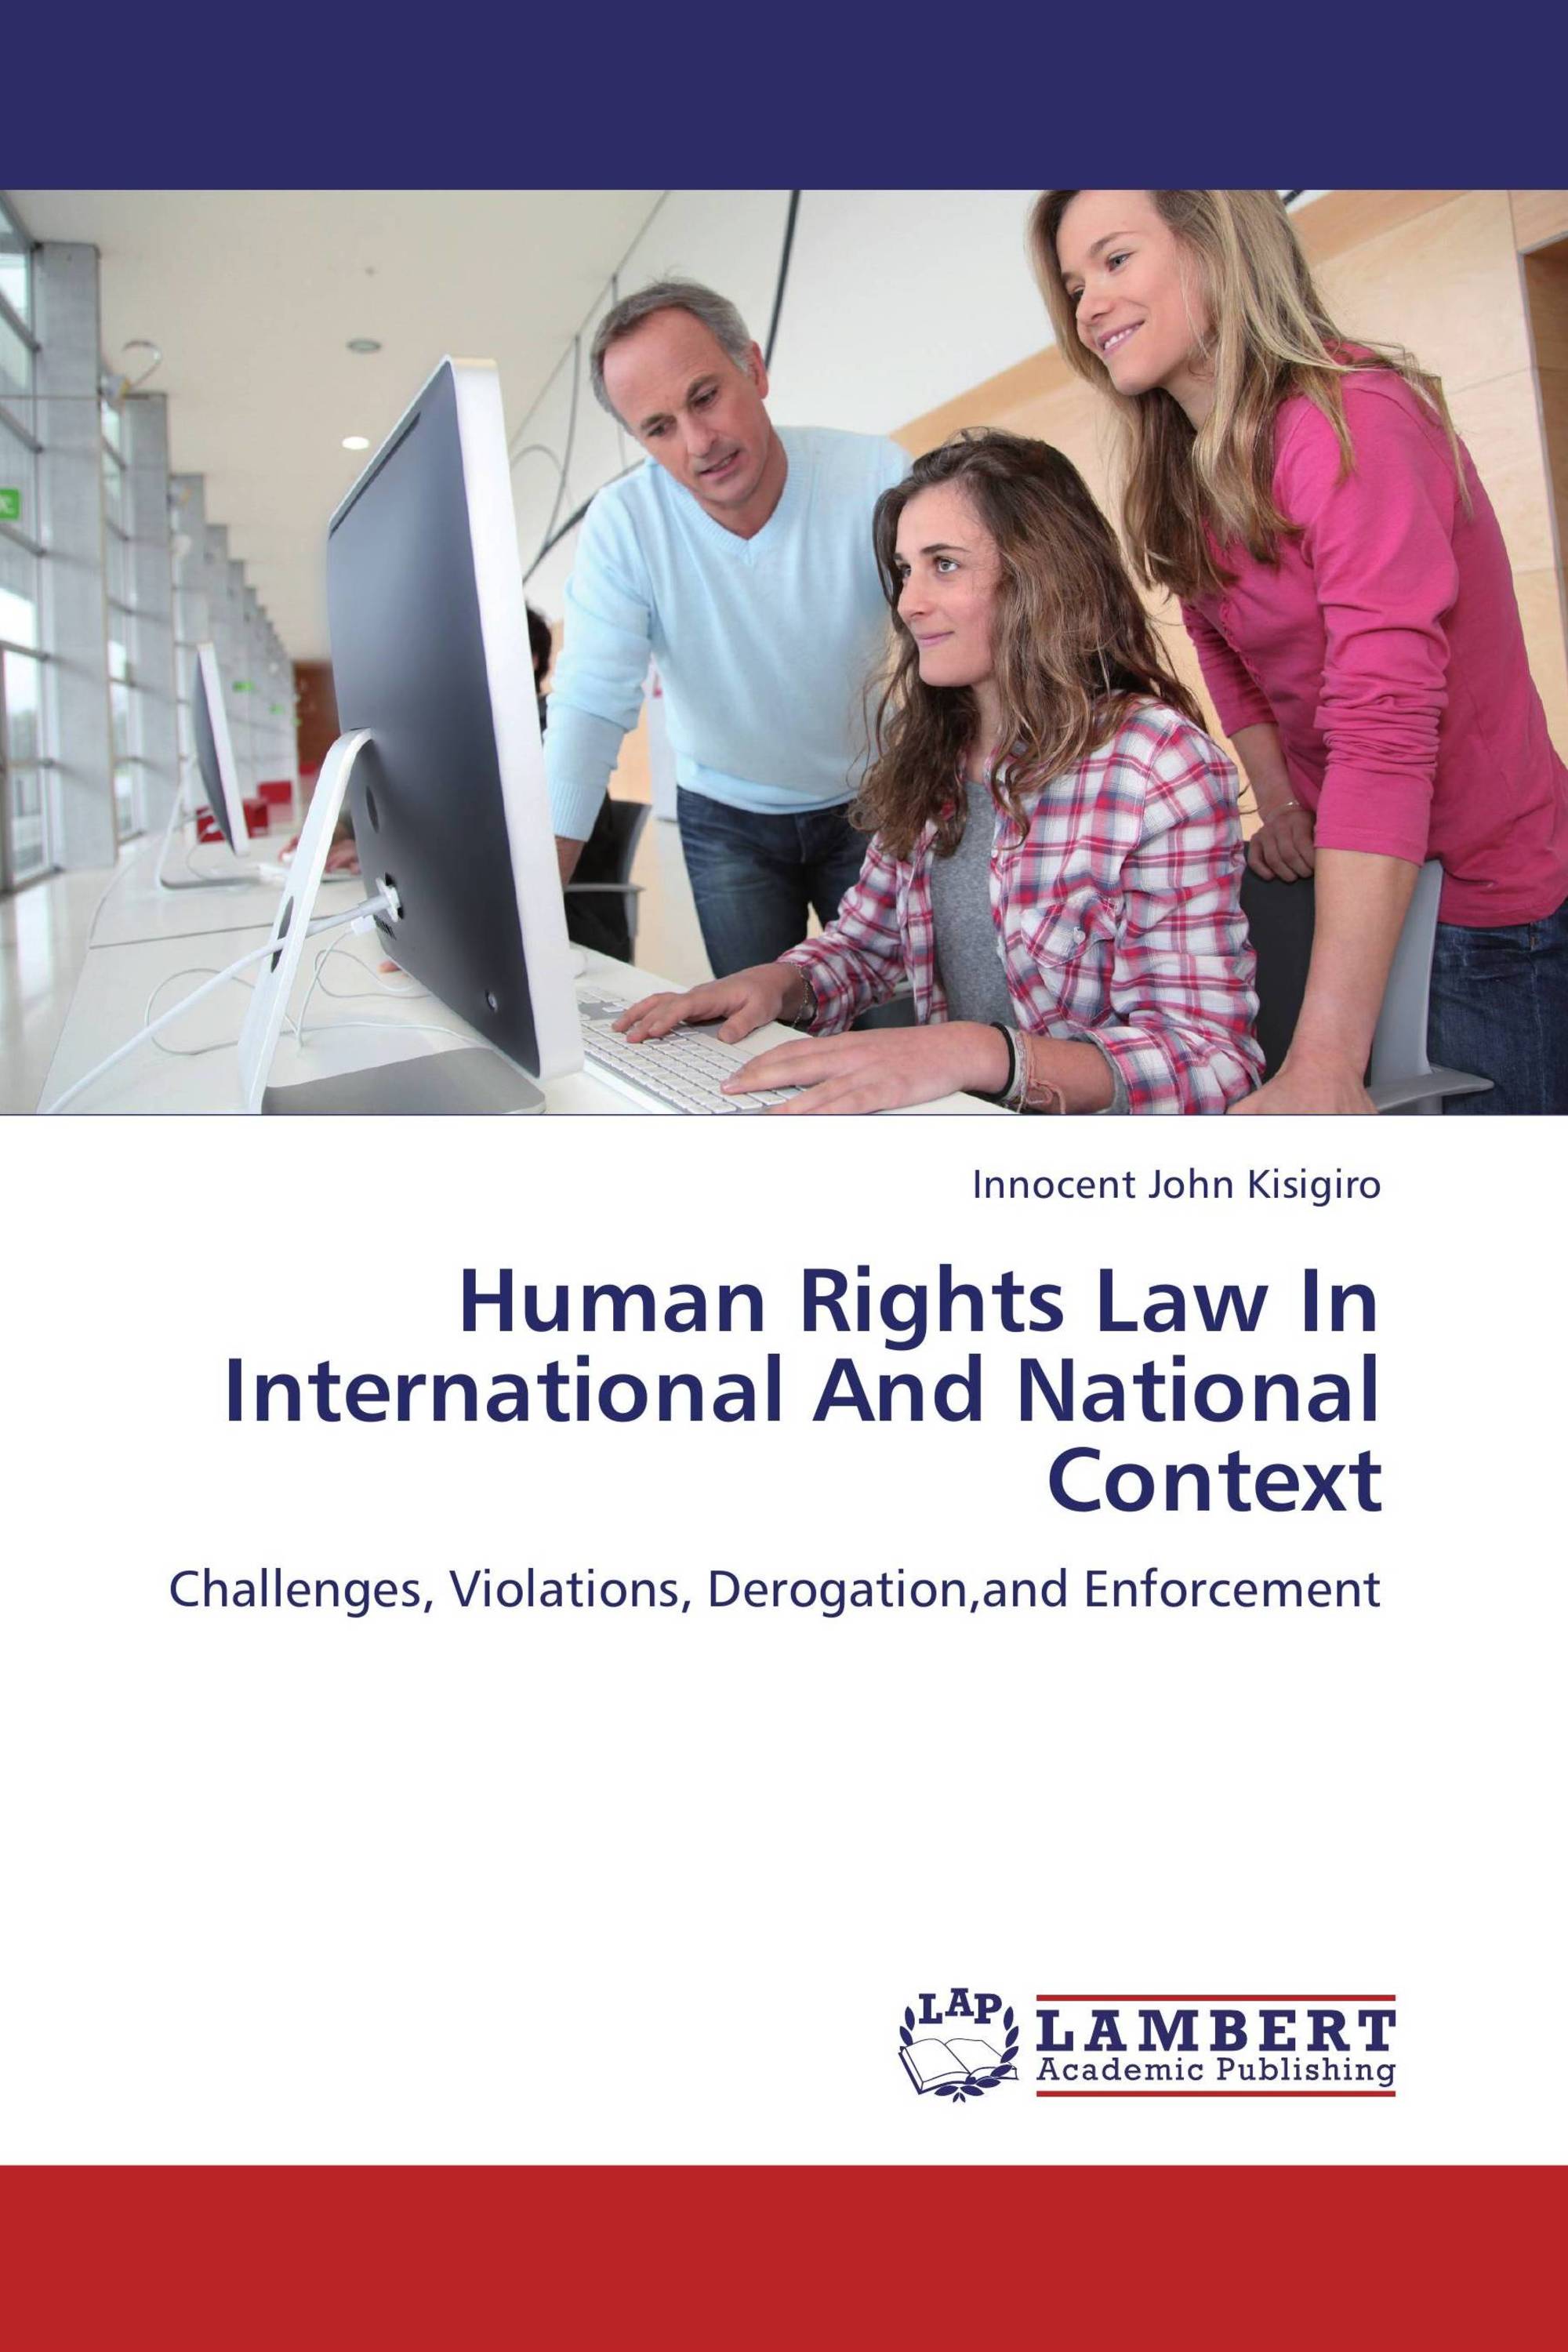 phd in international law and human rights